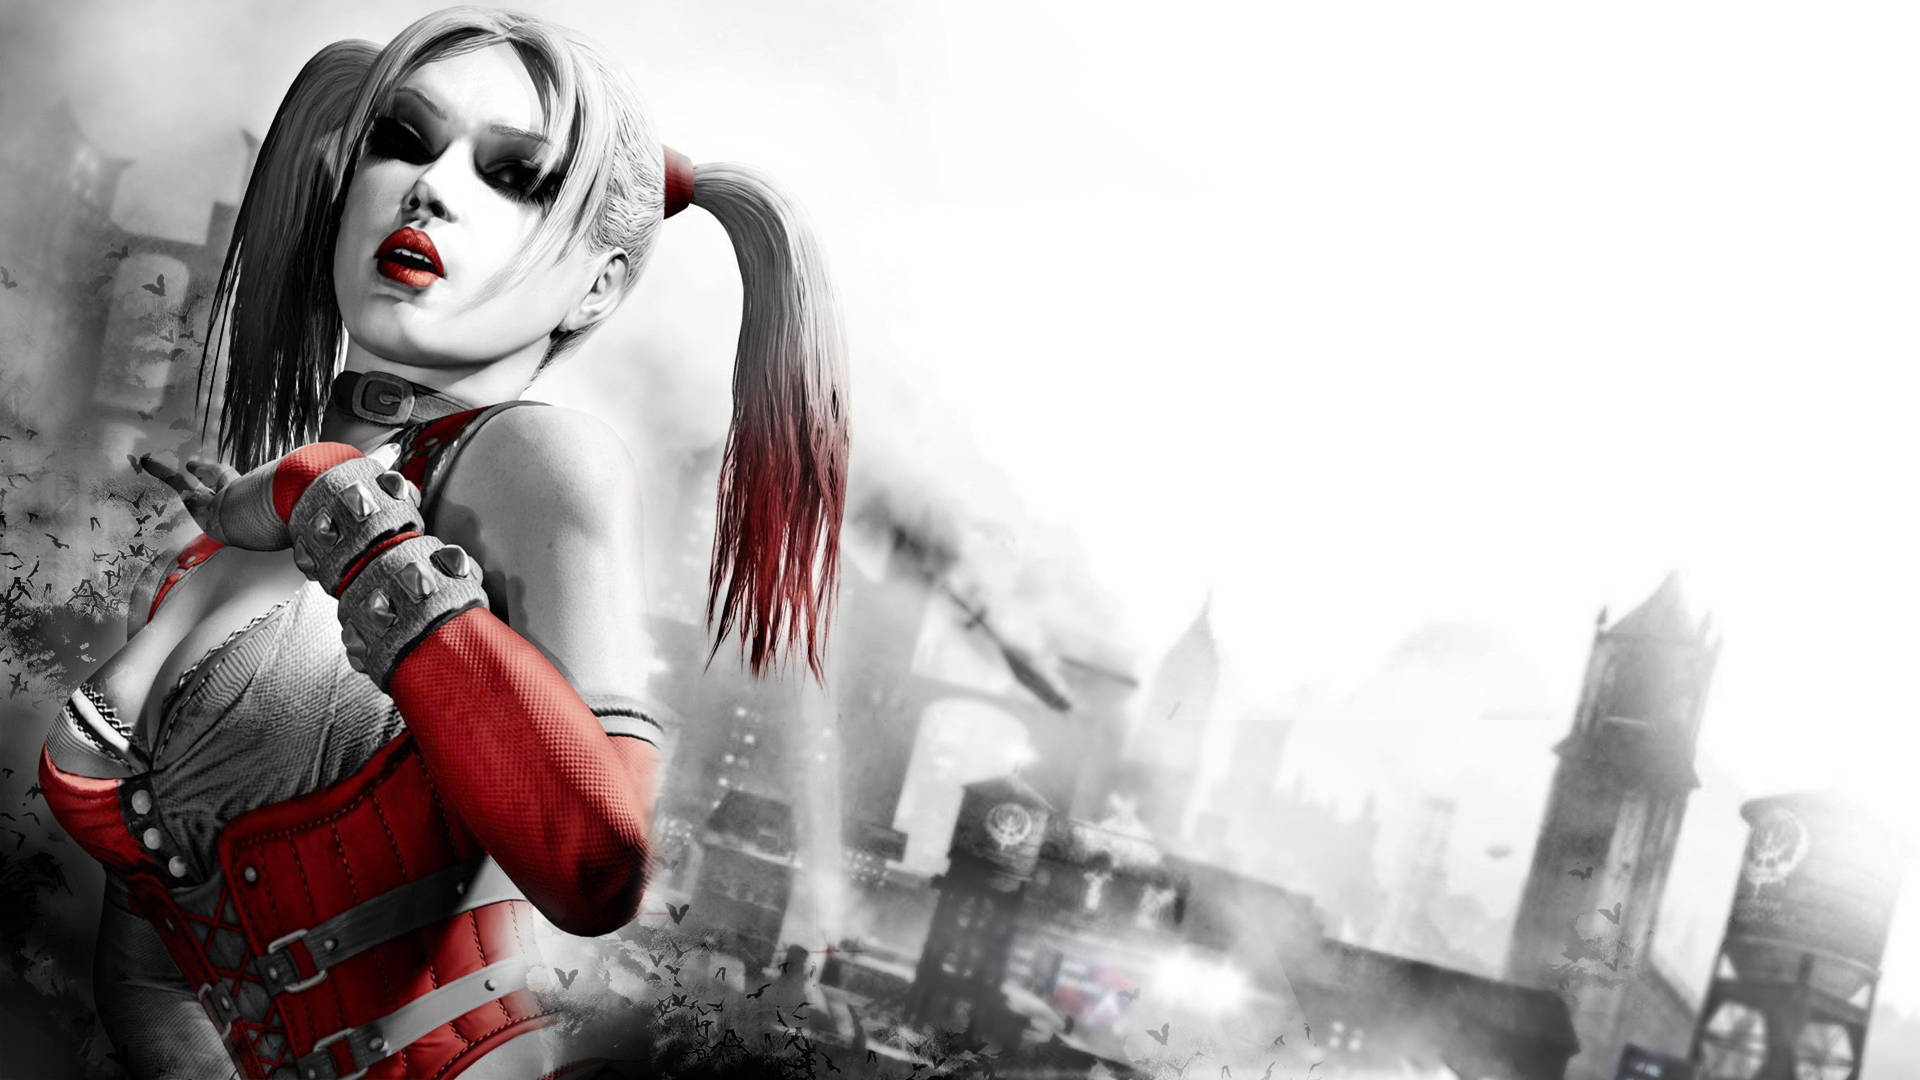 Harley Quinn, the fiery and rebellious leading lady Wallpaper